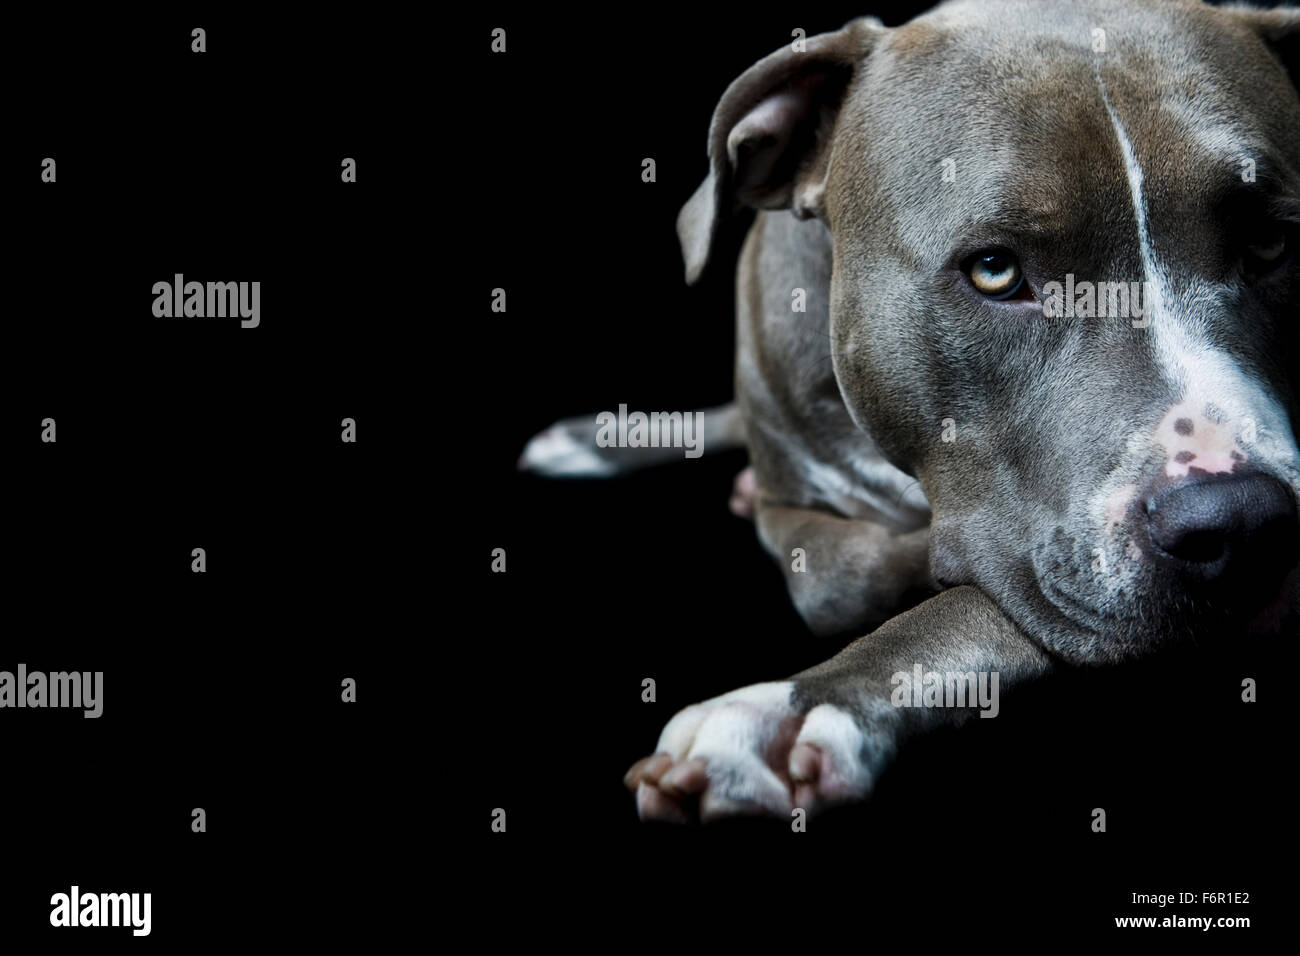 Close up face of Blue Pitbull dog laying down facing camera with eye contact on black background in studio Stock Photo